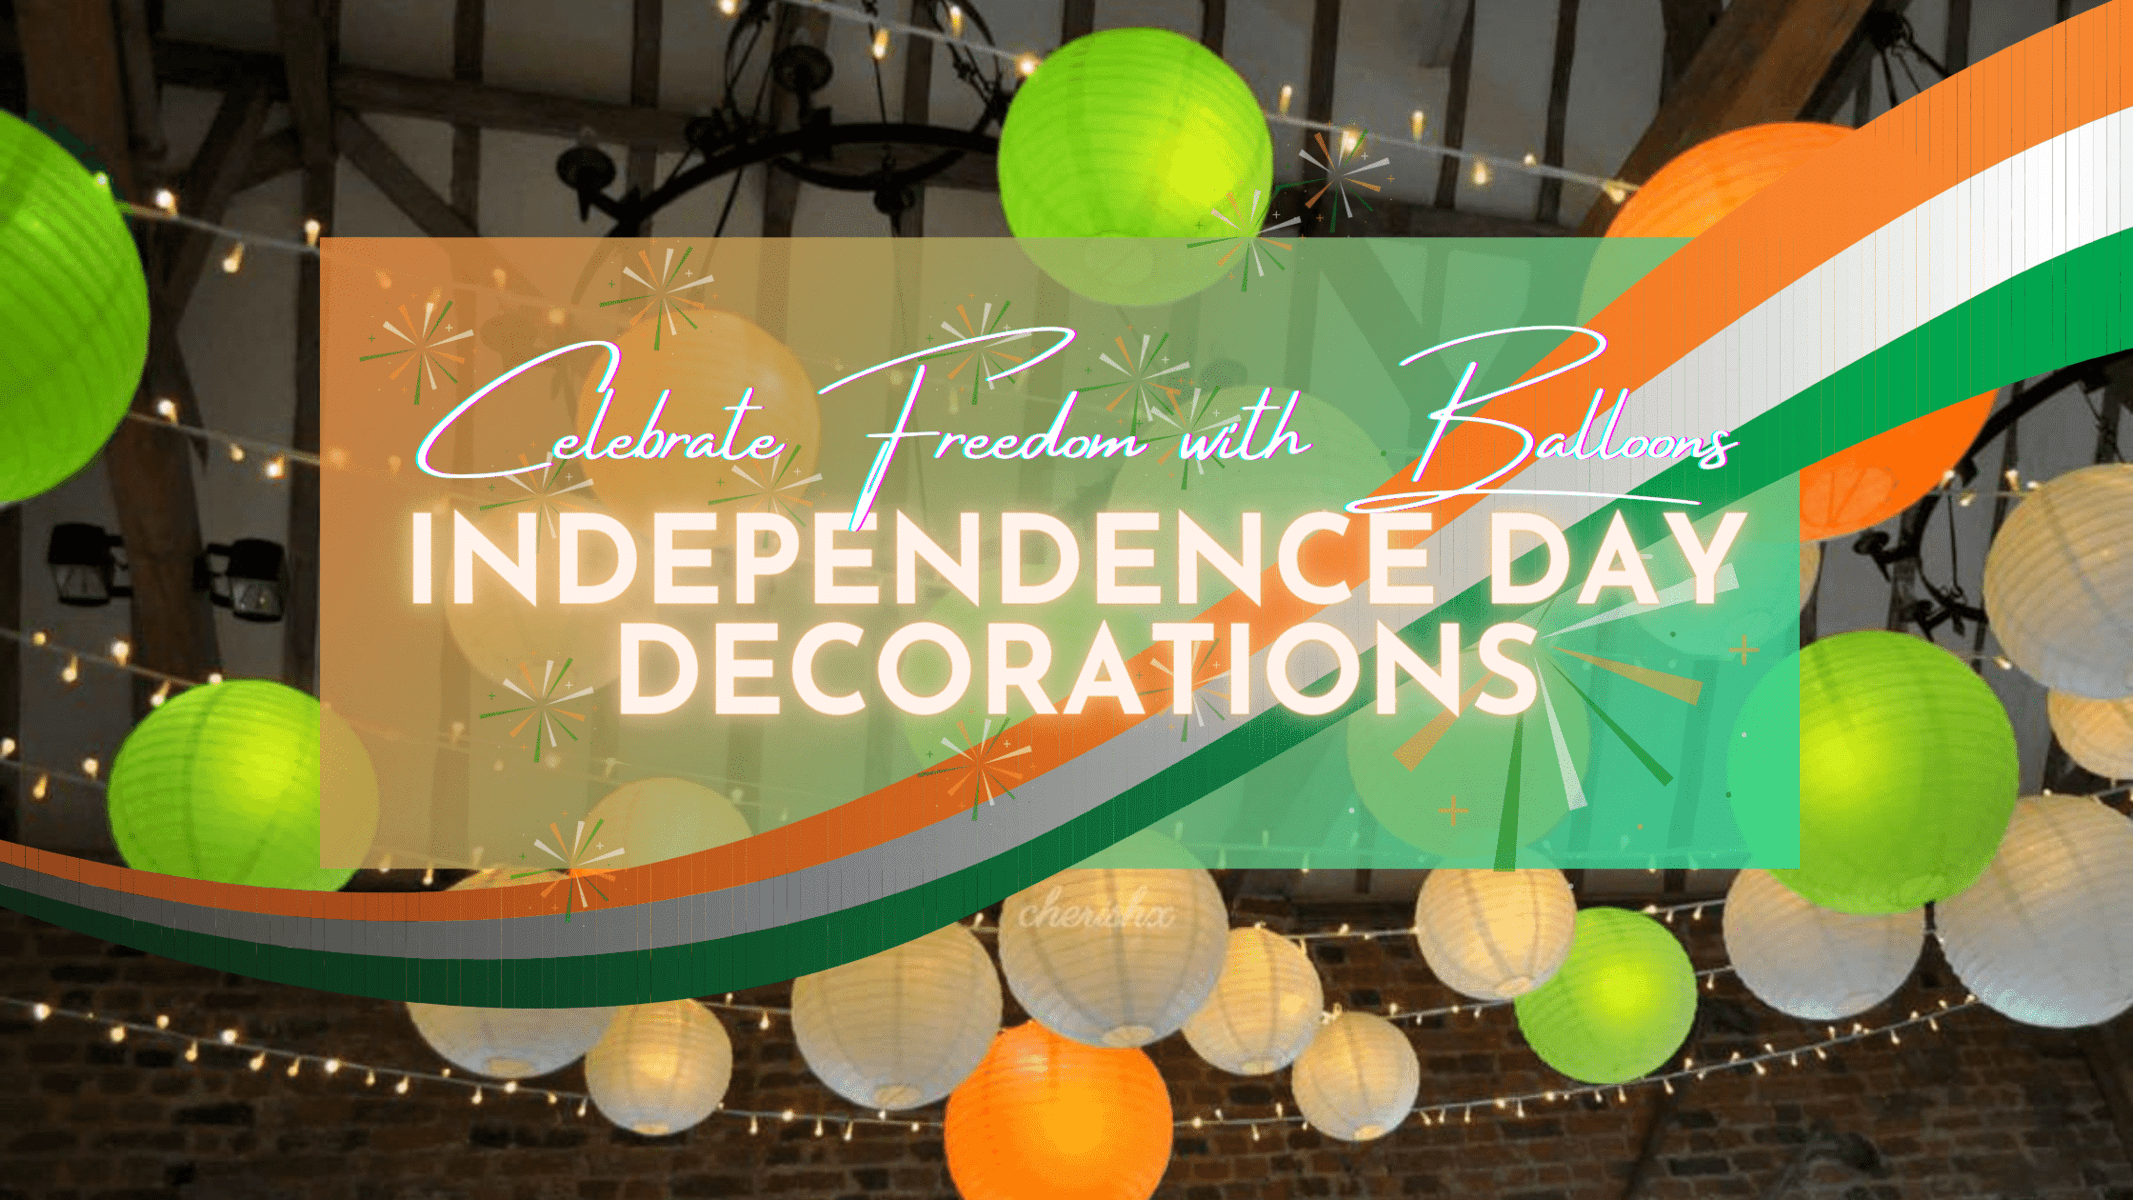 Celebrating Nation’s Freedom with Balloons: Independence Day Balloon Decorations